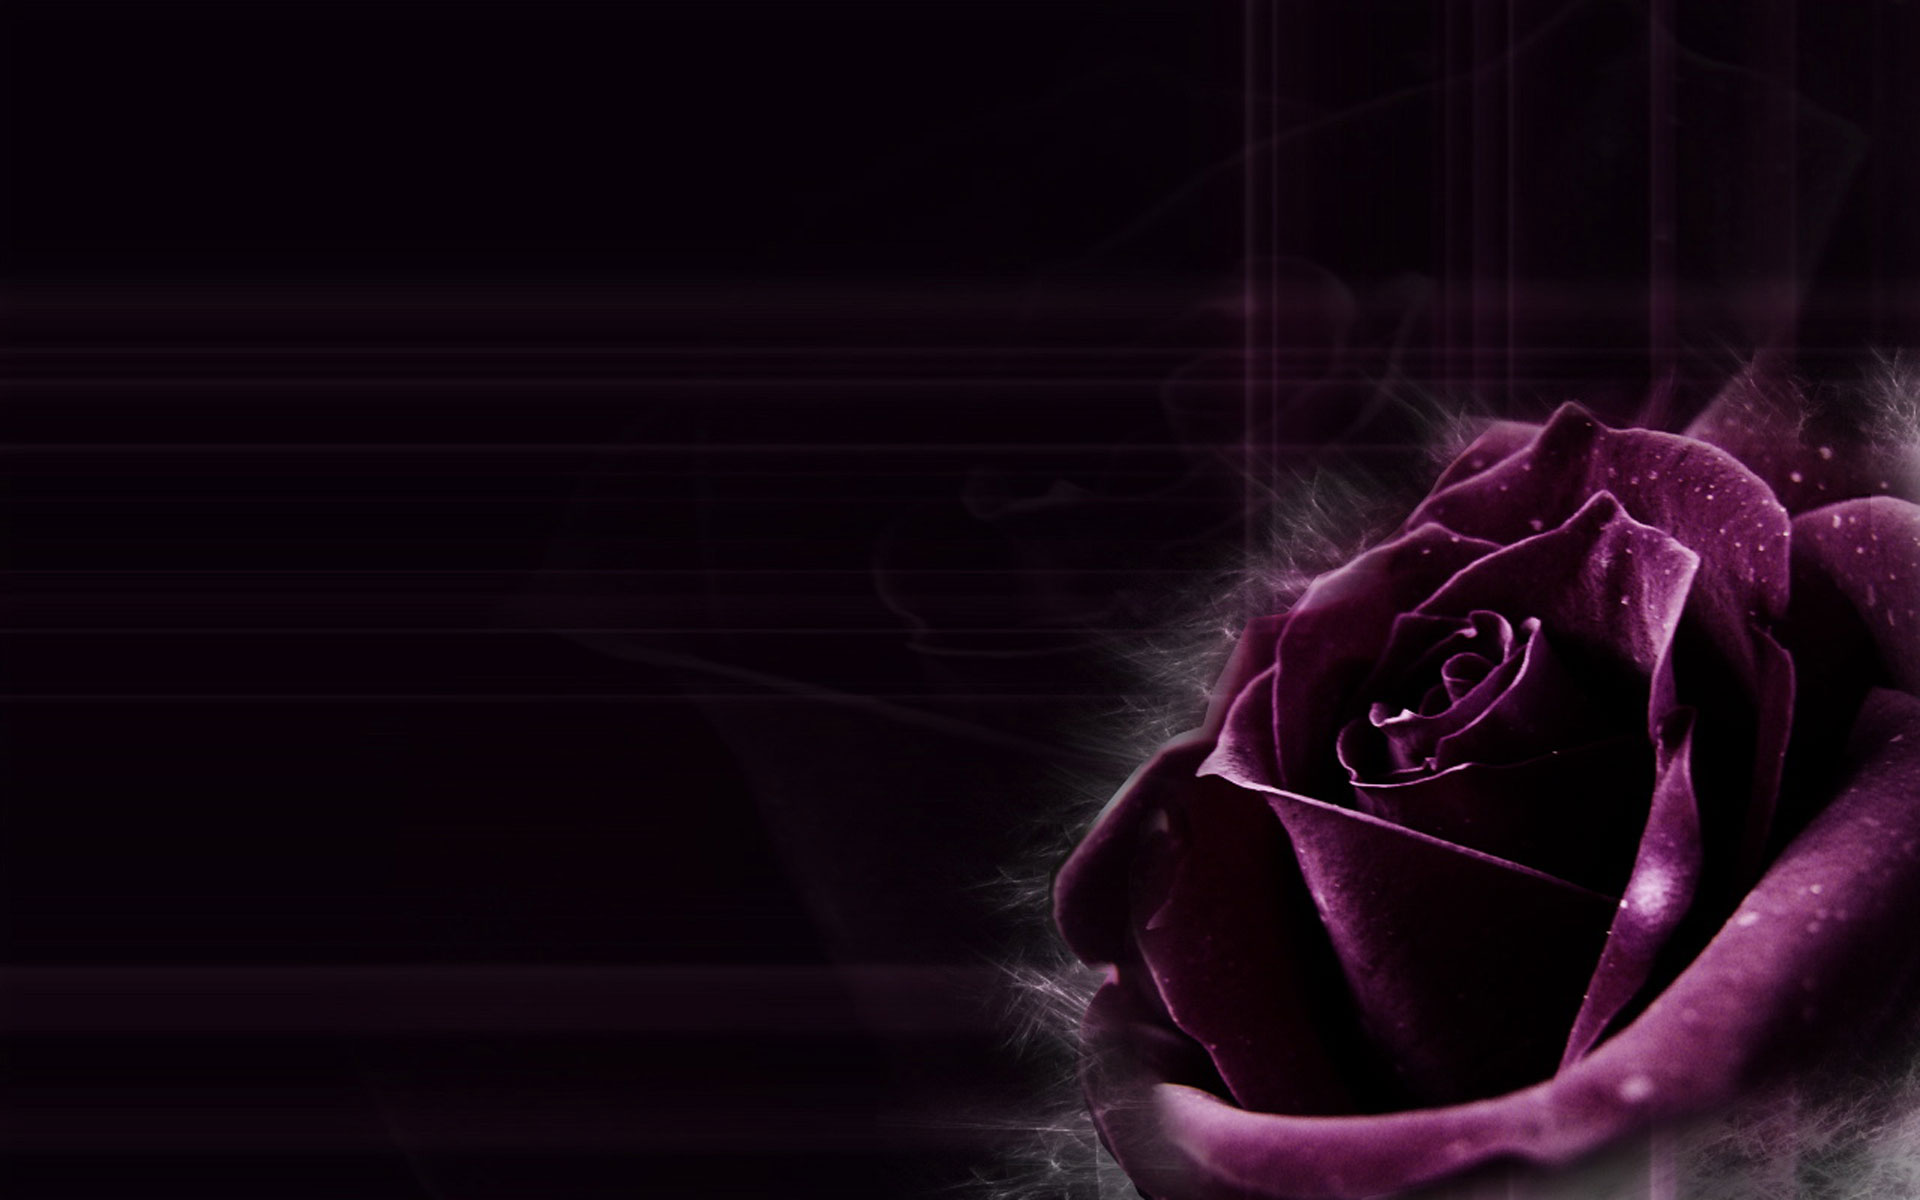 Dark Purple Rose Backgrounds Images Pictures   Becuo